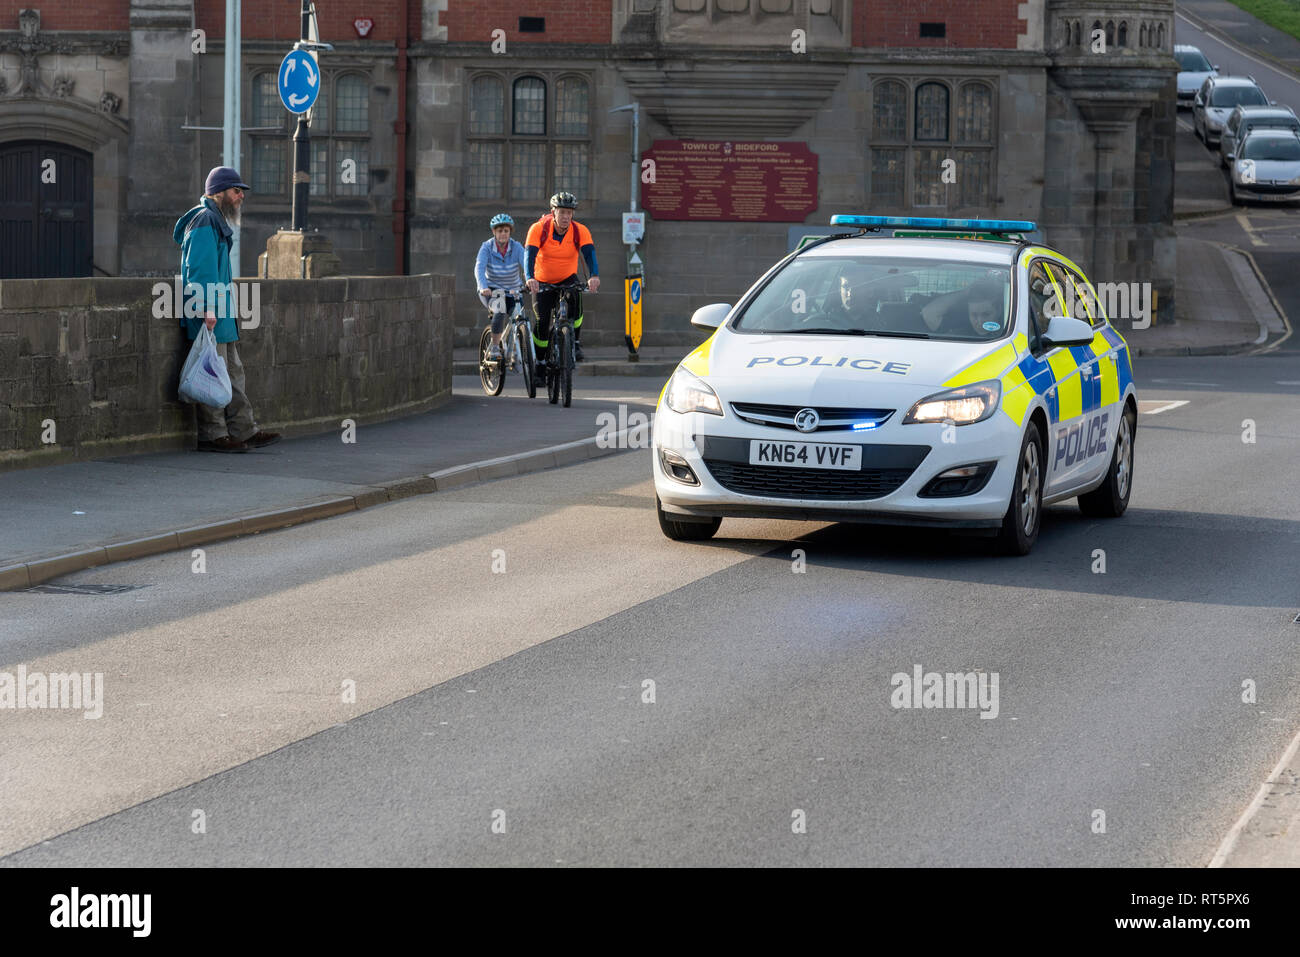 Bideford, North Devon, England, UK. February 2019. Police car on a blue light  with two officers onboard Stock Photo